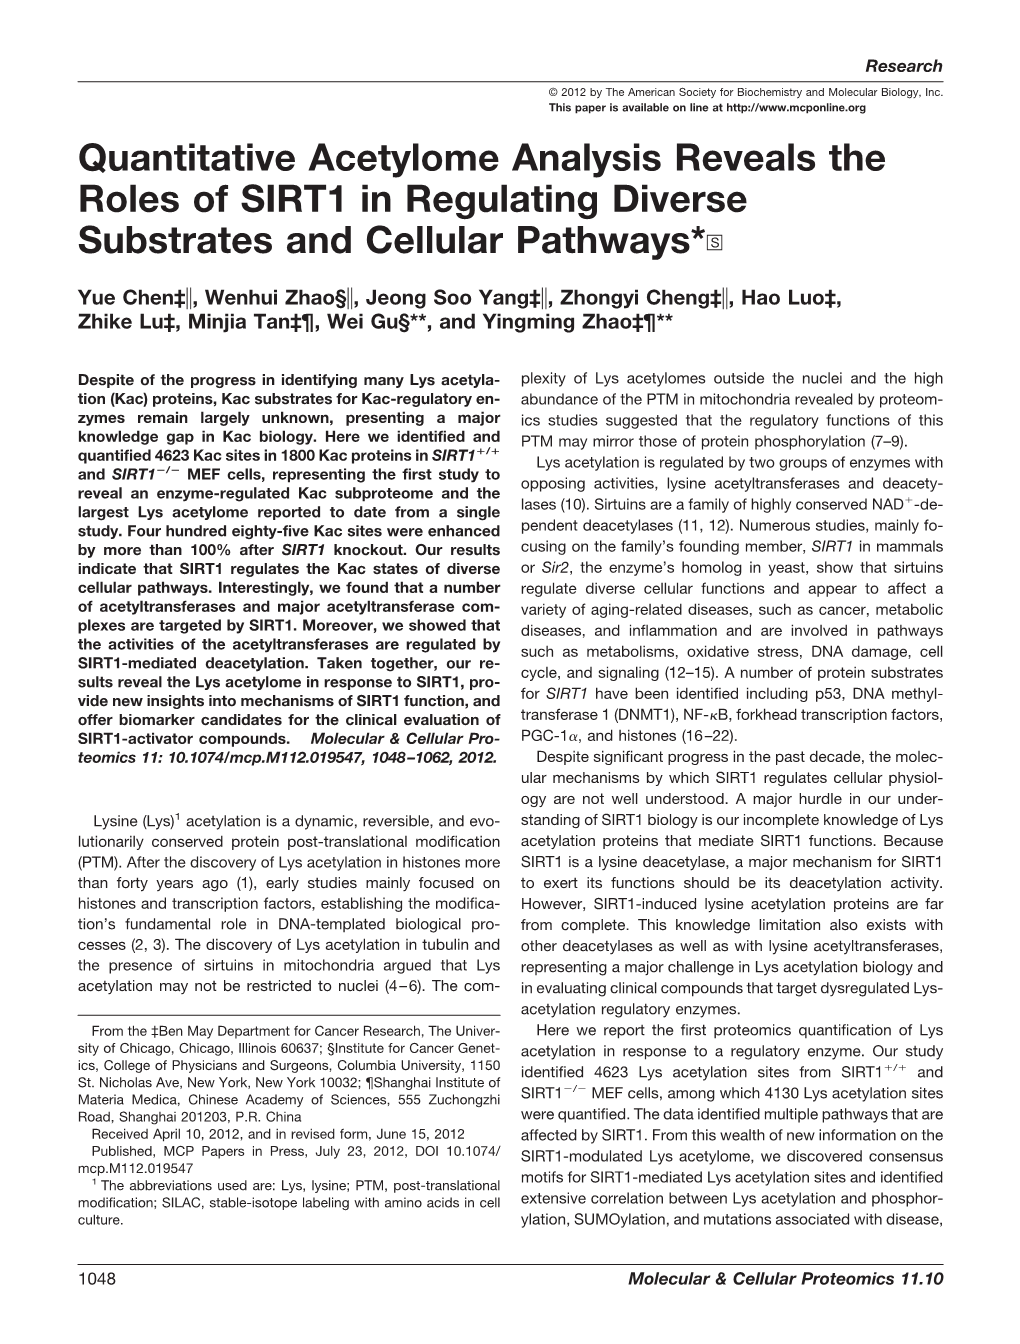 Quantitative Acetylome Analysis Reveals the Roles of SIRT1 in Regulating Diverse Substrates and Cellular Pathways*□S